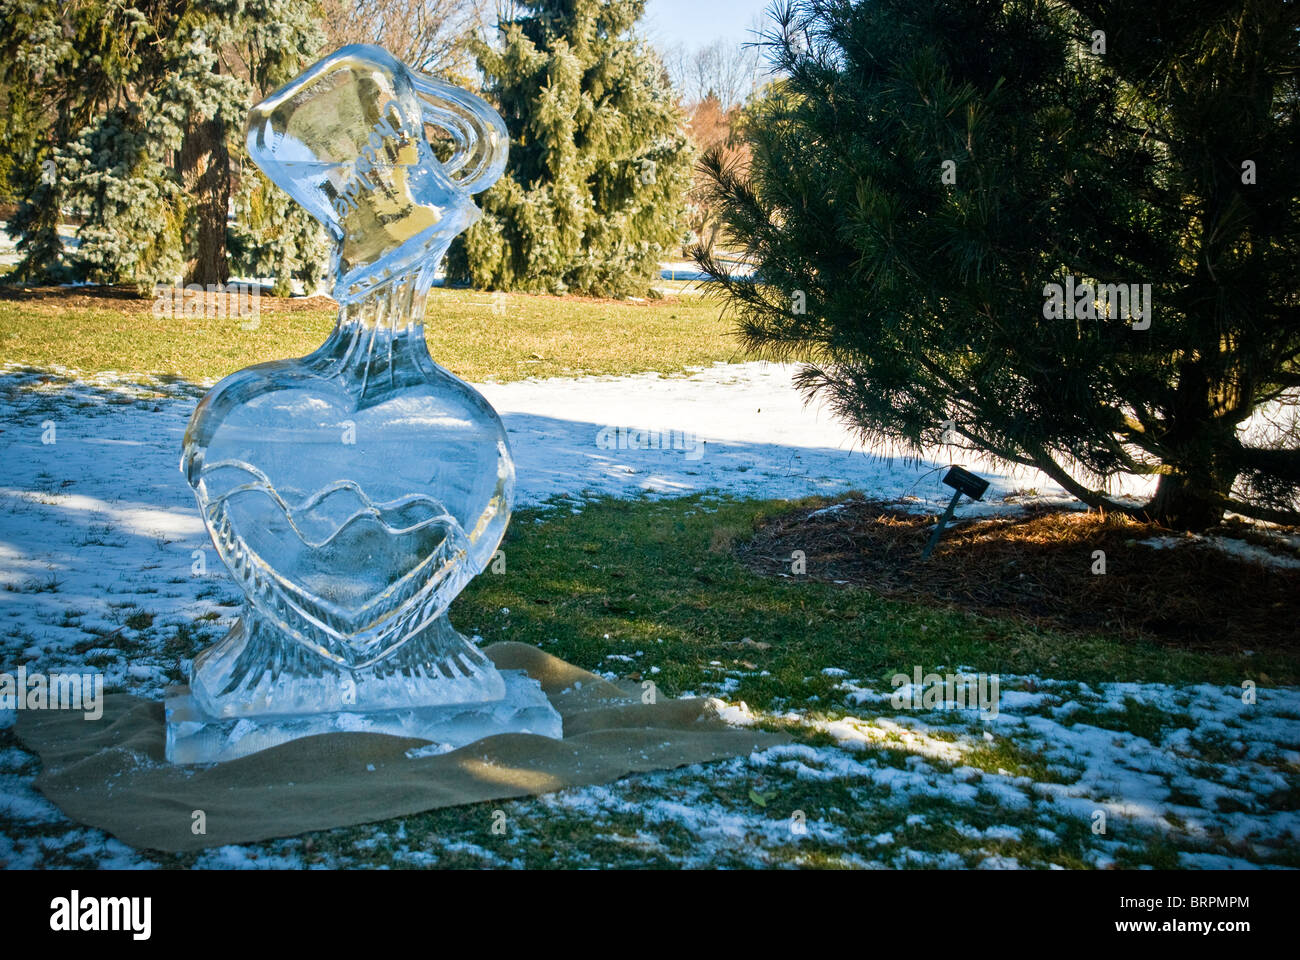 Ice carving creations at Hershey Park Rose Gardens winter festival Stock  Photo - Alamy